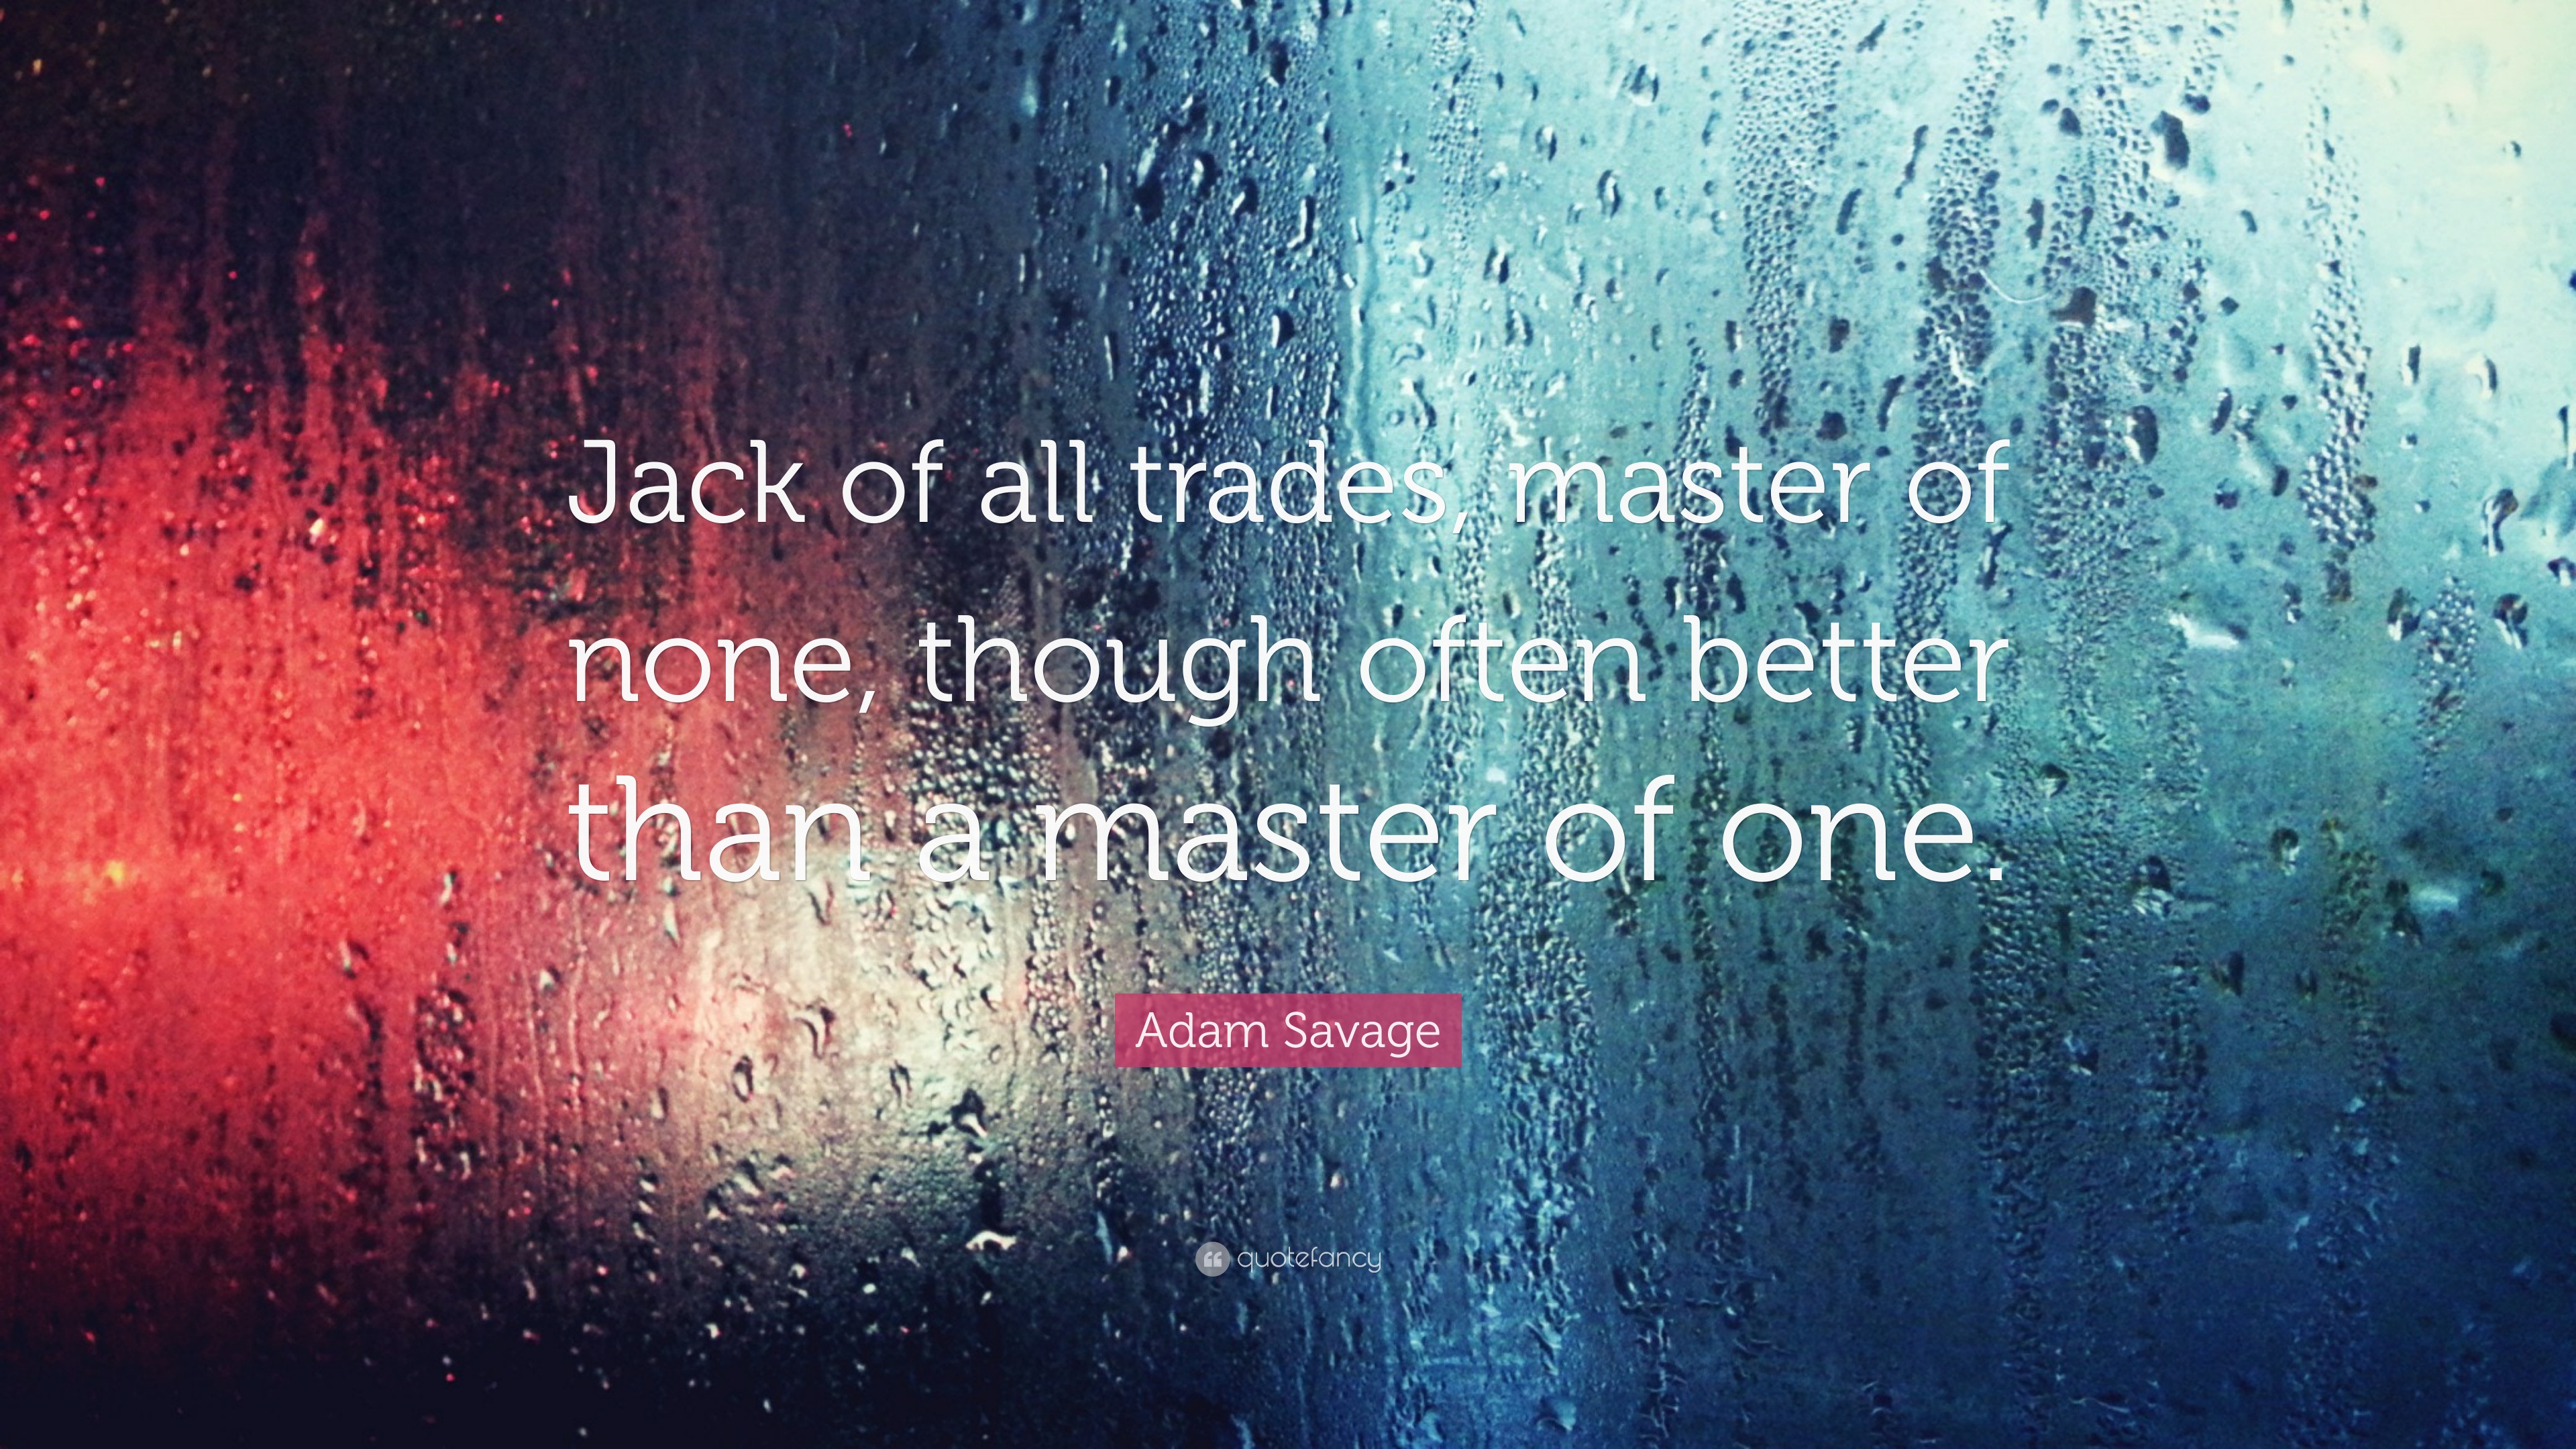 Jack of all trades master of none full quote